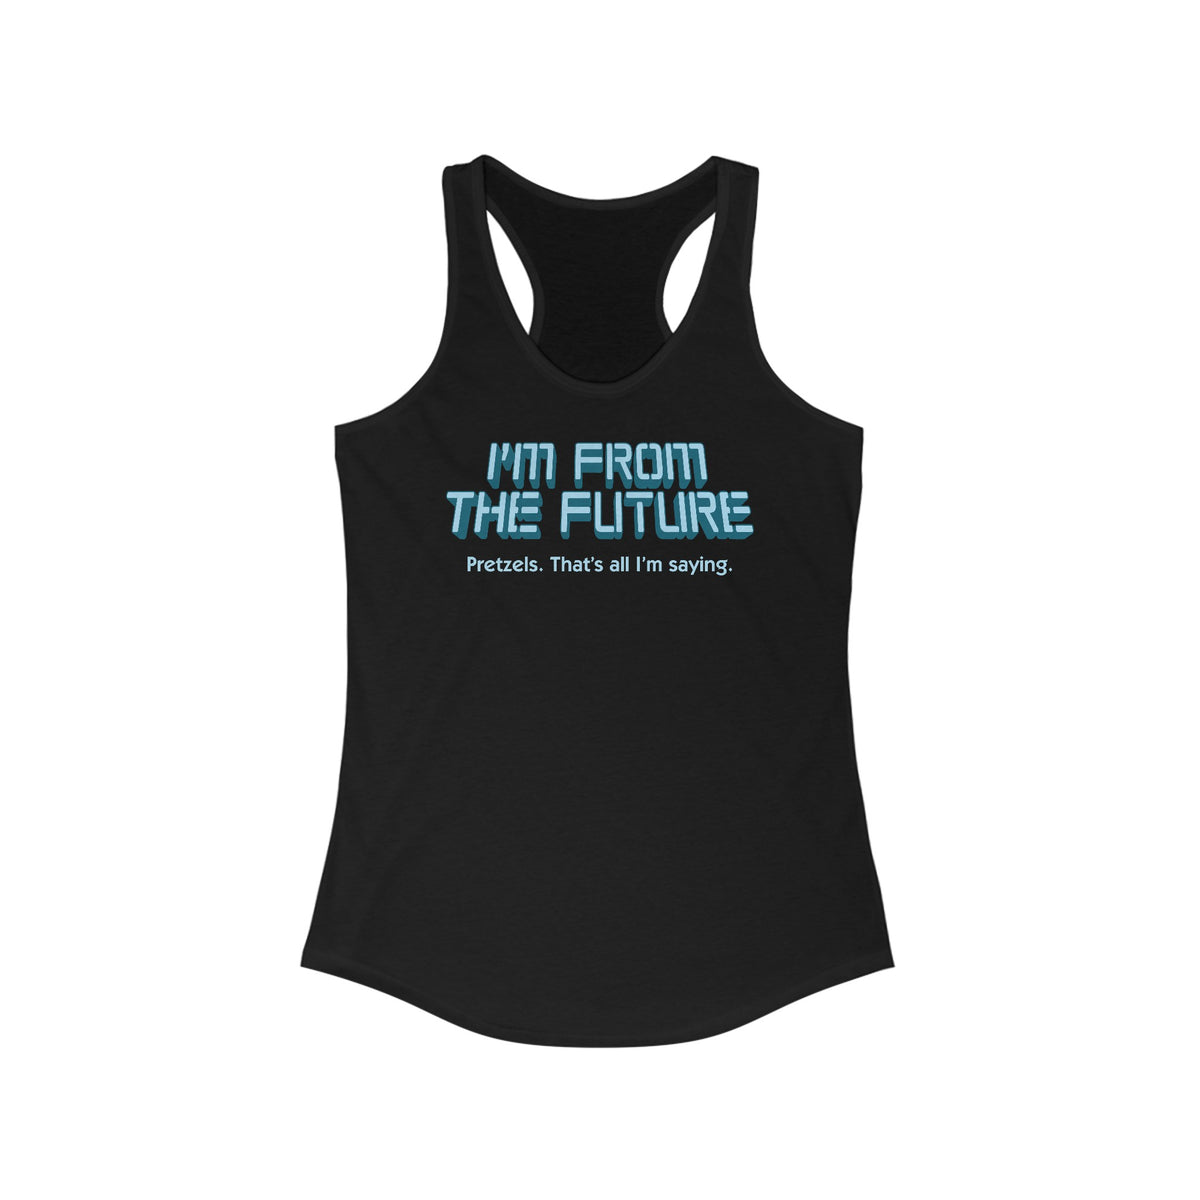 I'm From The Future - Pretzels. That's All I'm Saying. - Women's Racerback Tank